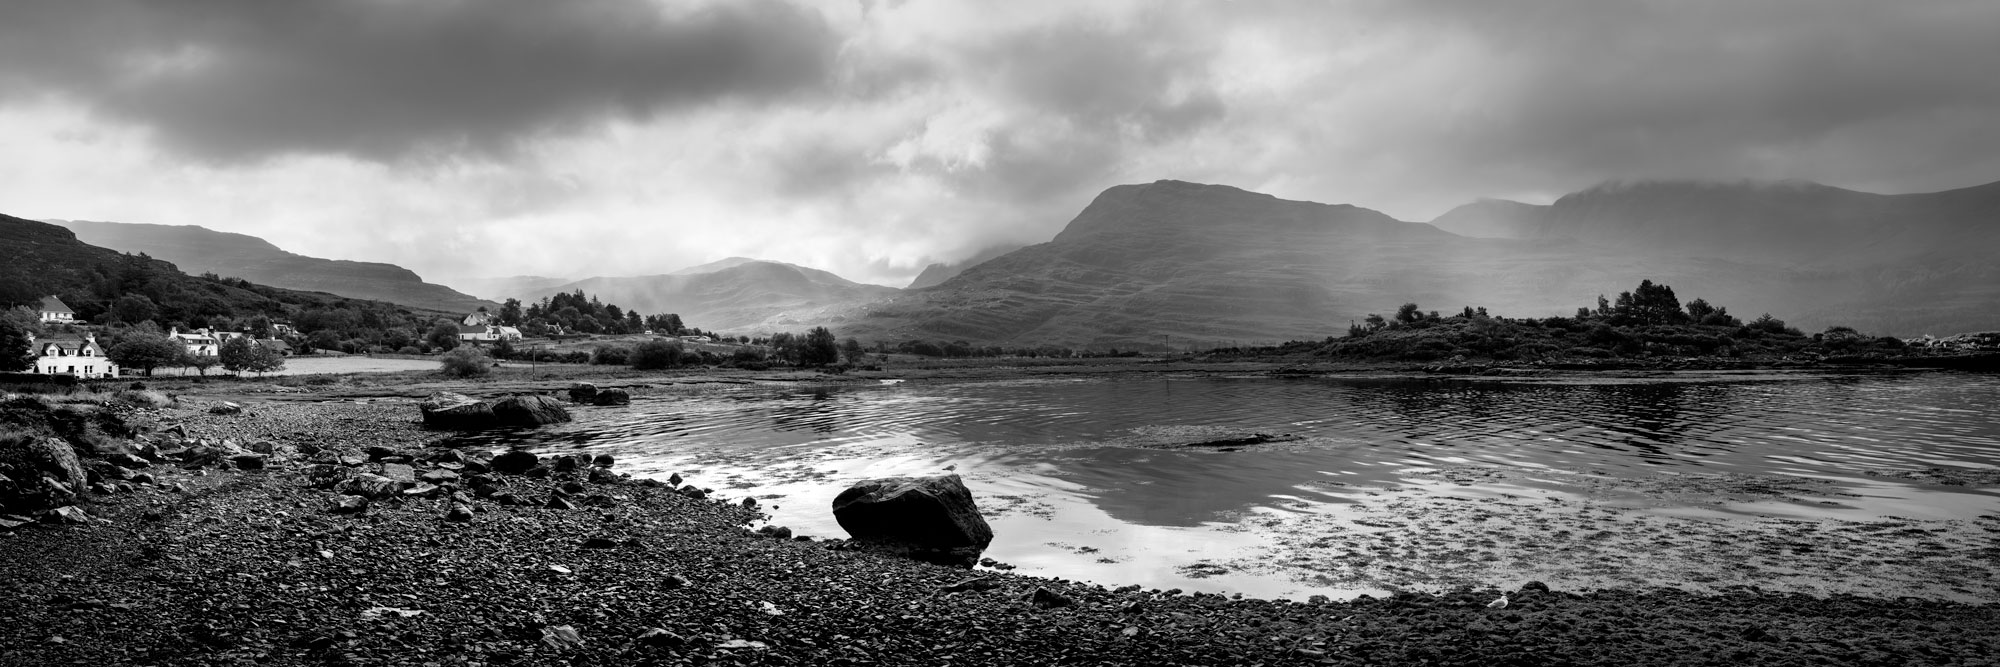 Black and white panorama of Torridon Village and Loch in the Scottish Highlands